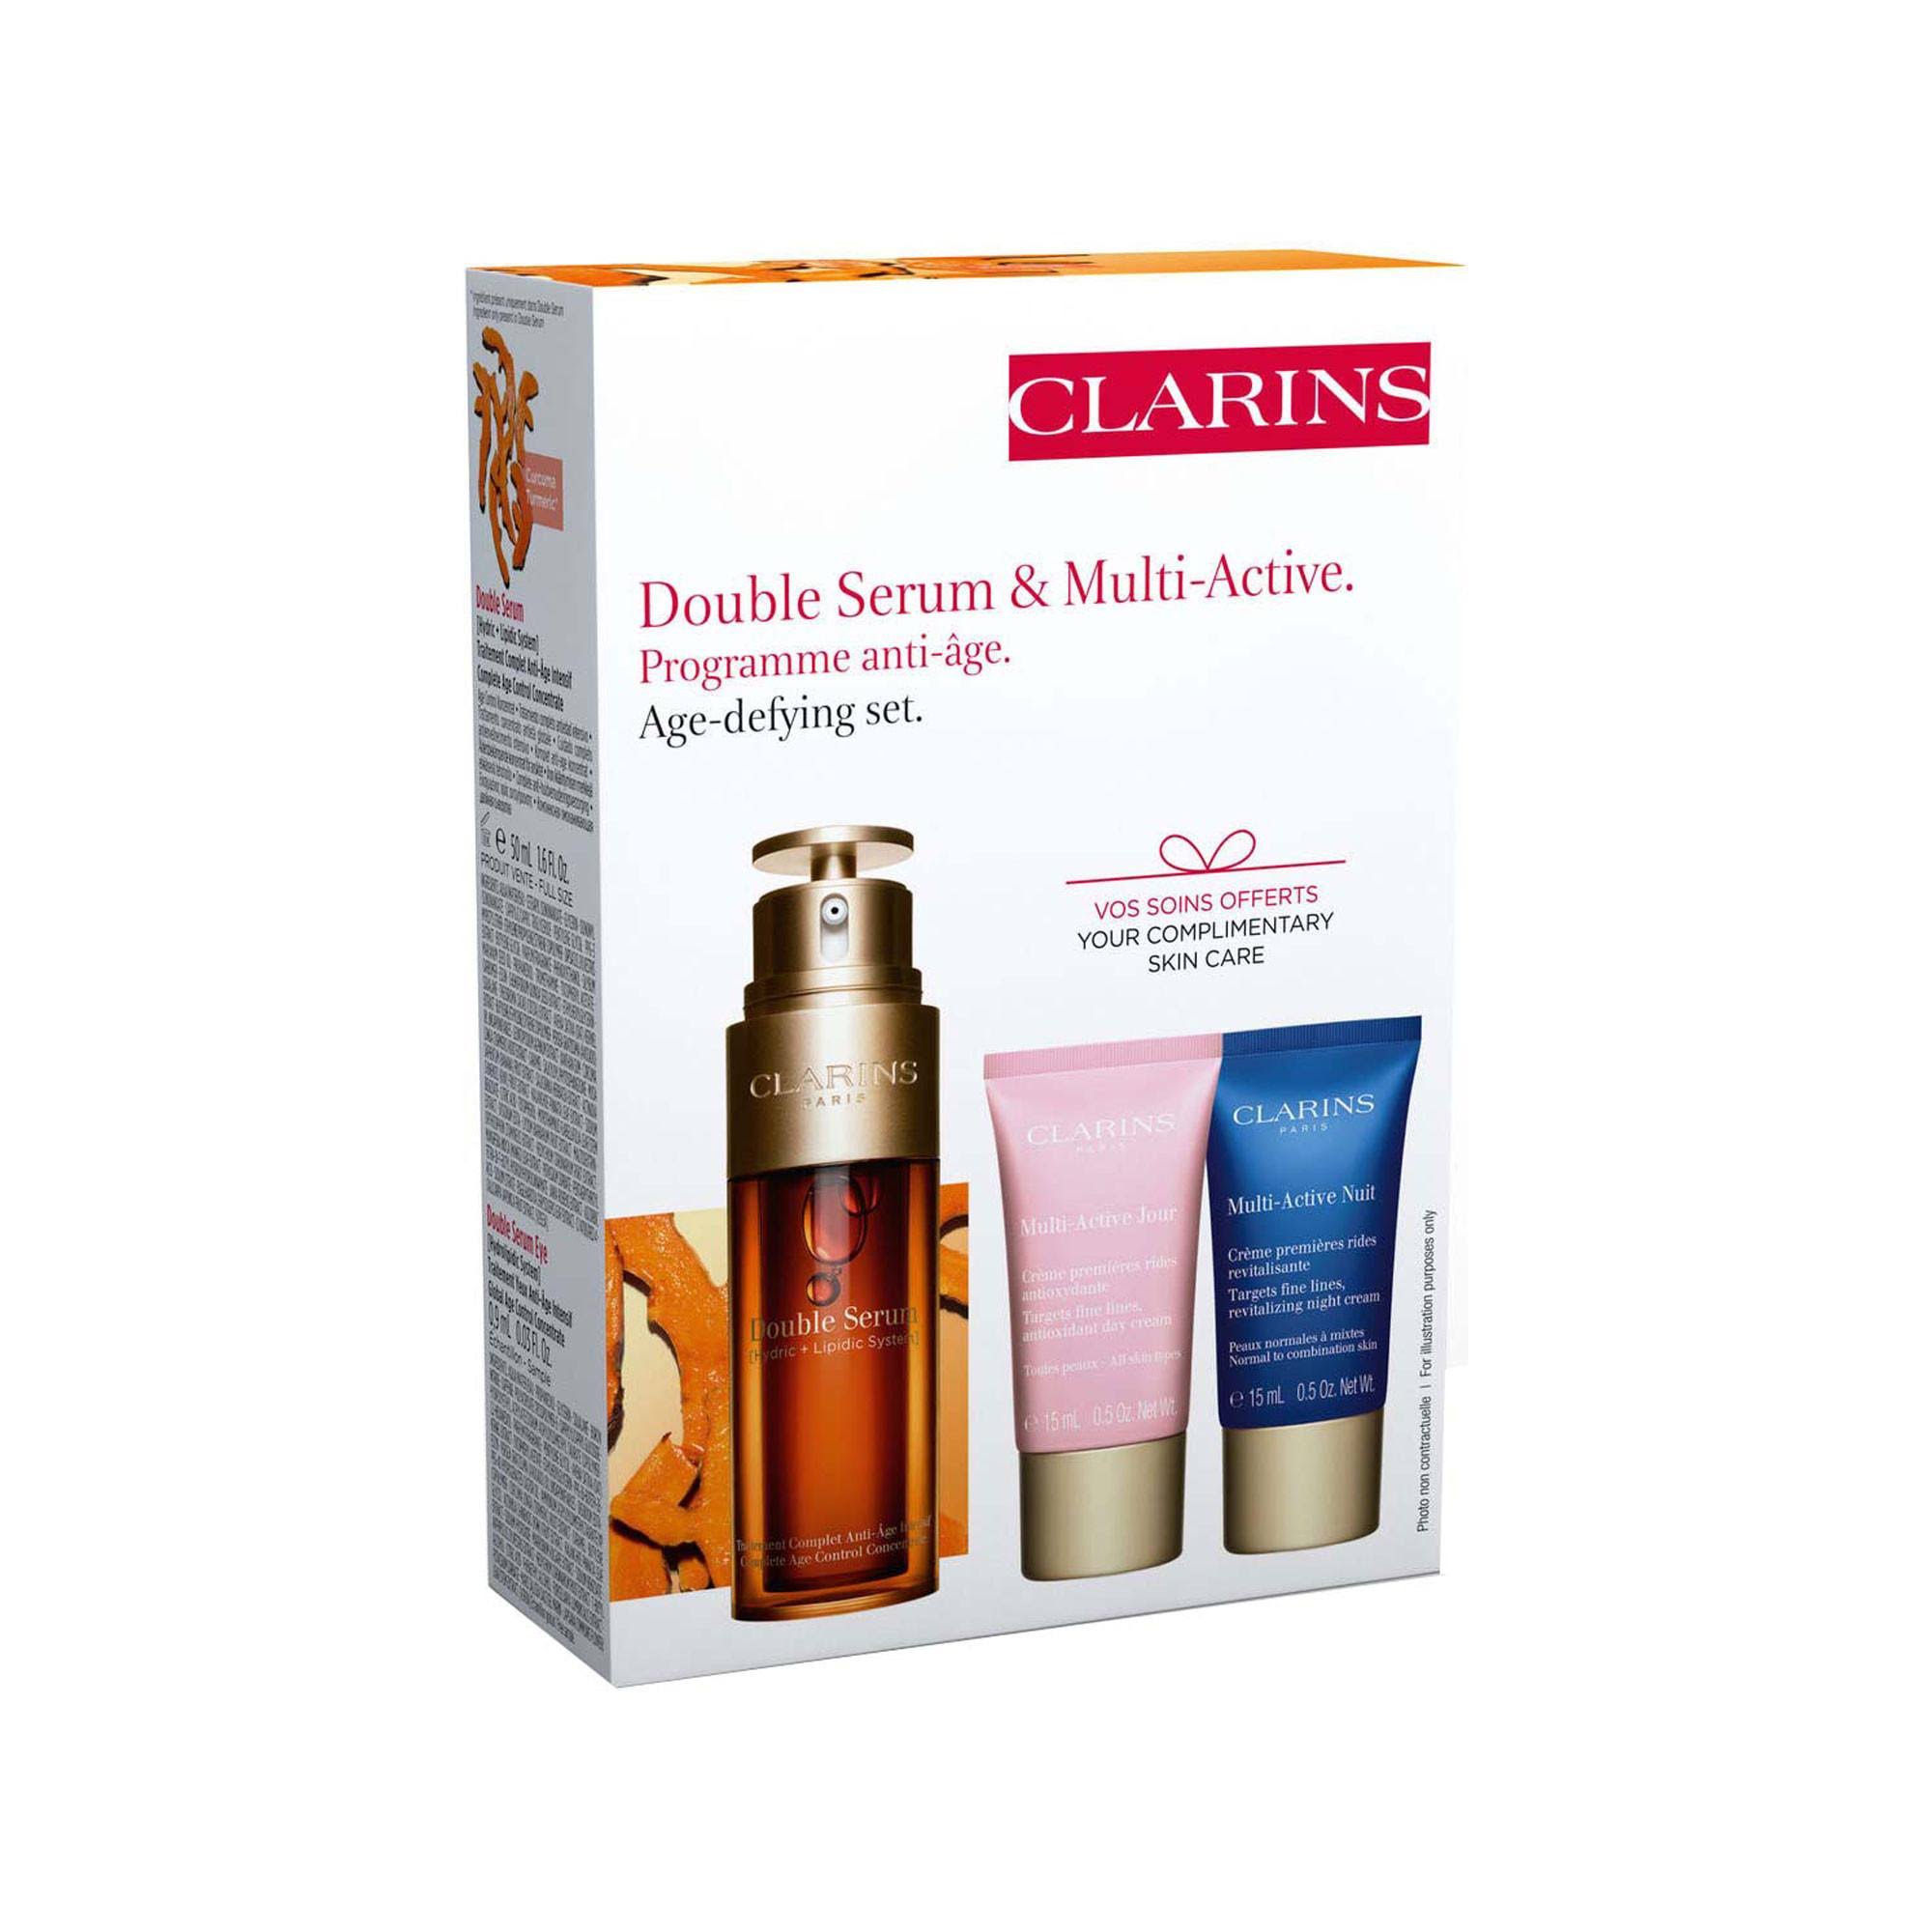 Clarins Double Serum & Multi-Active Collection